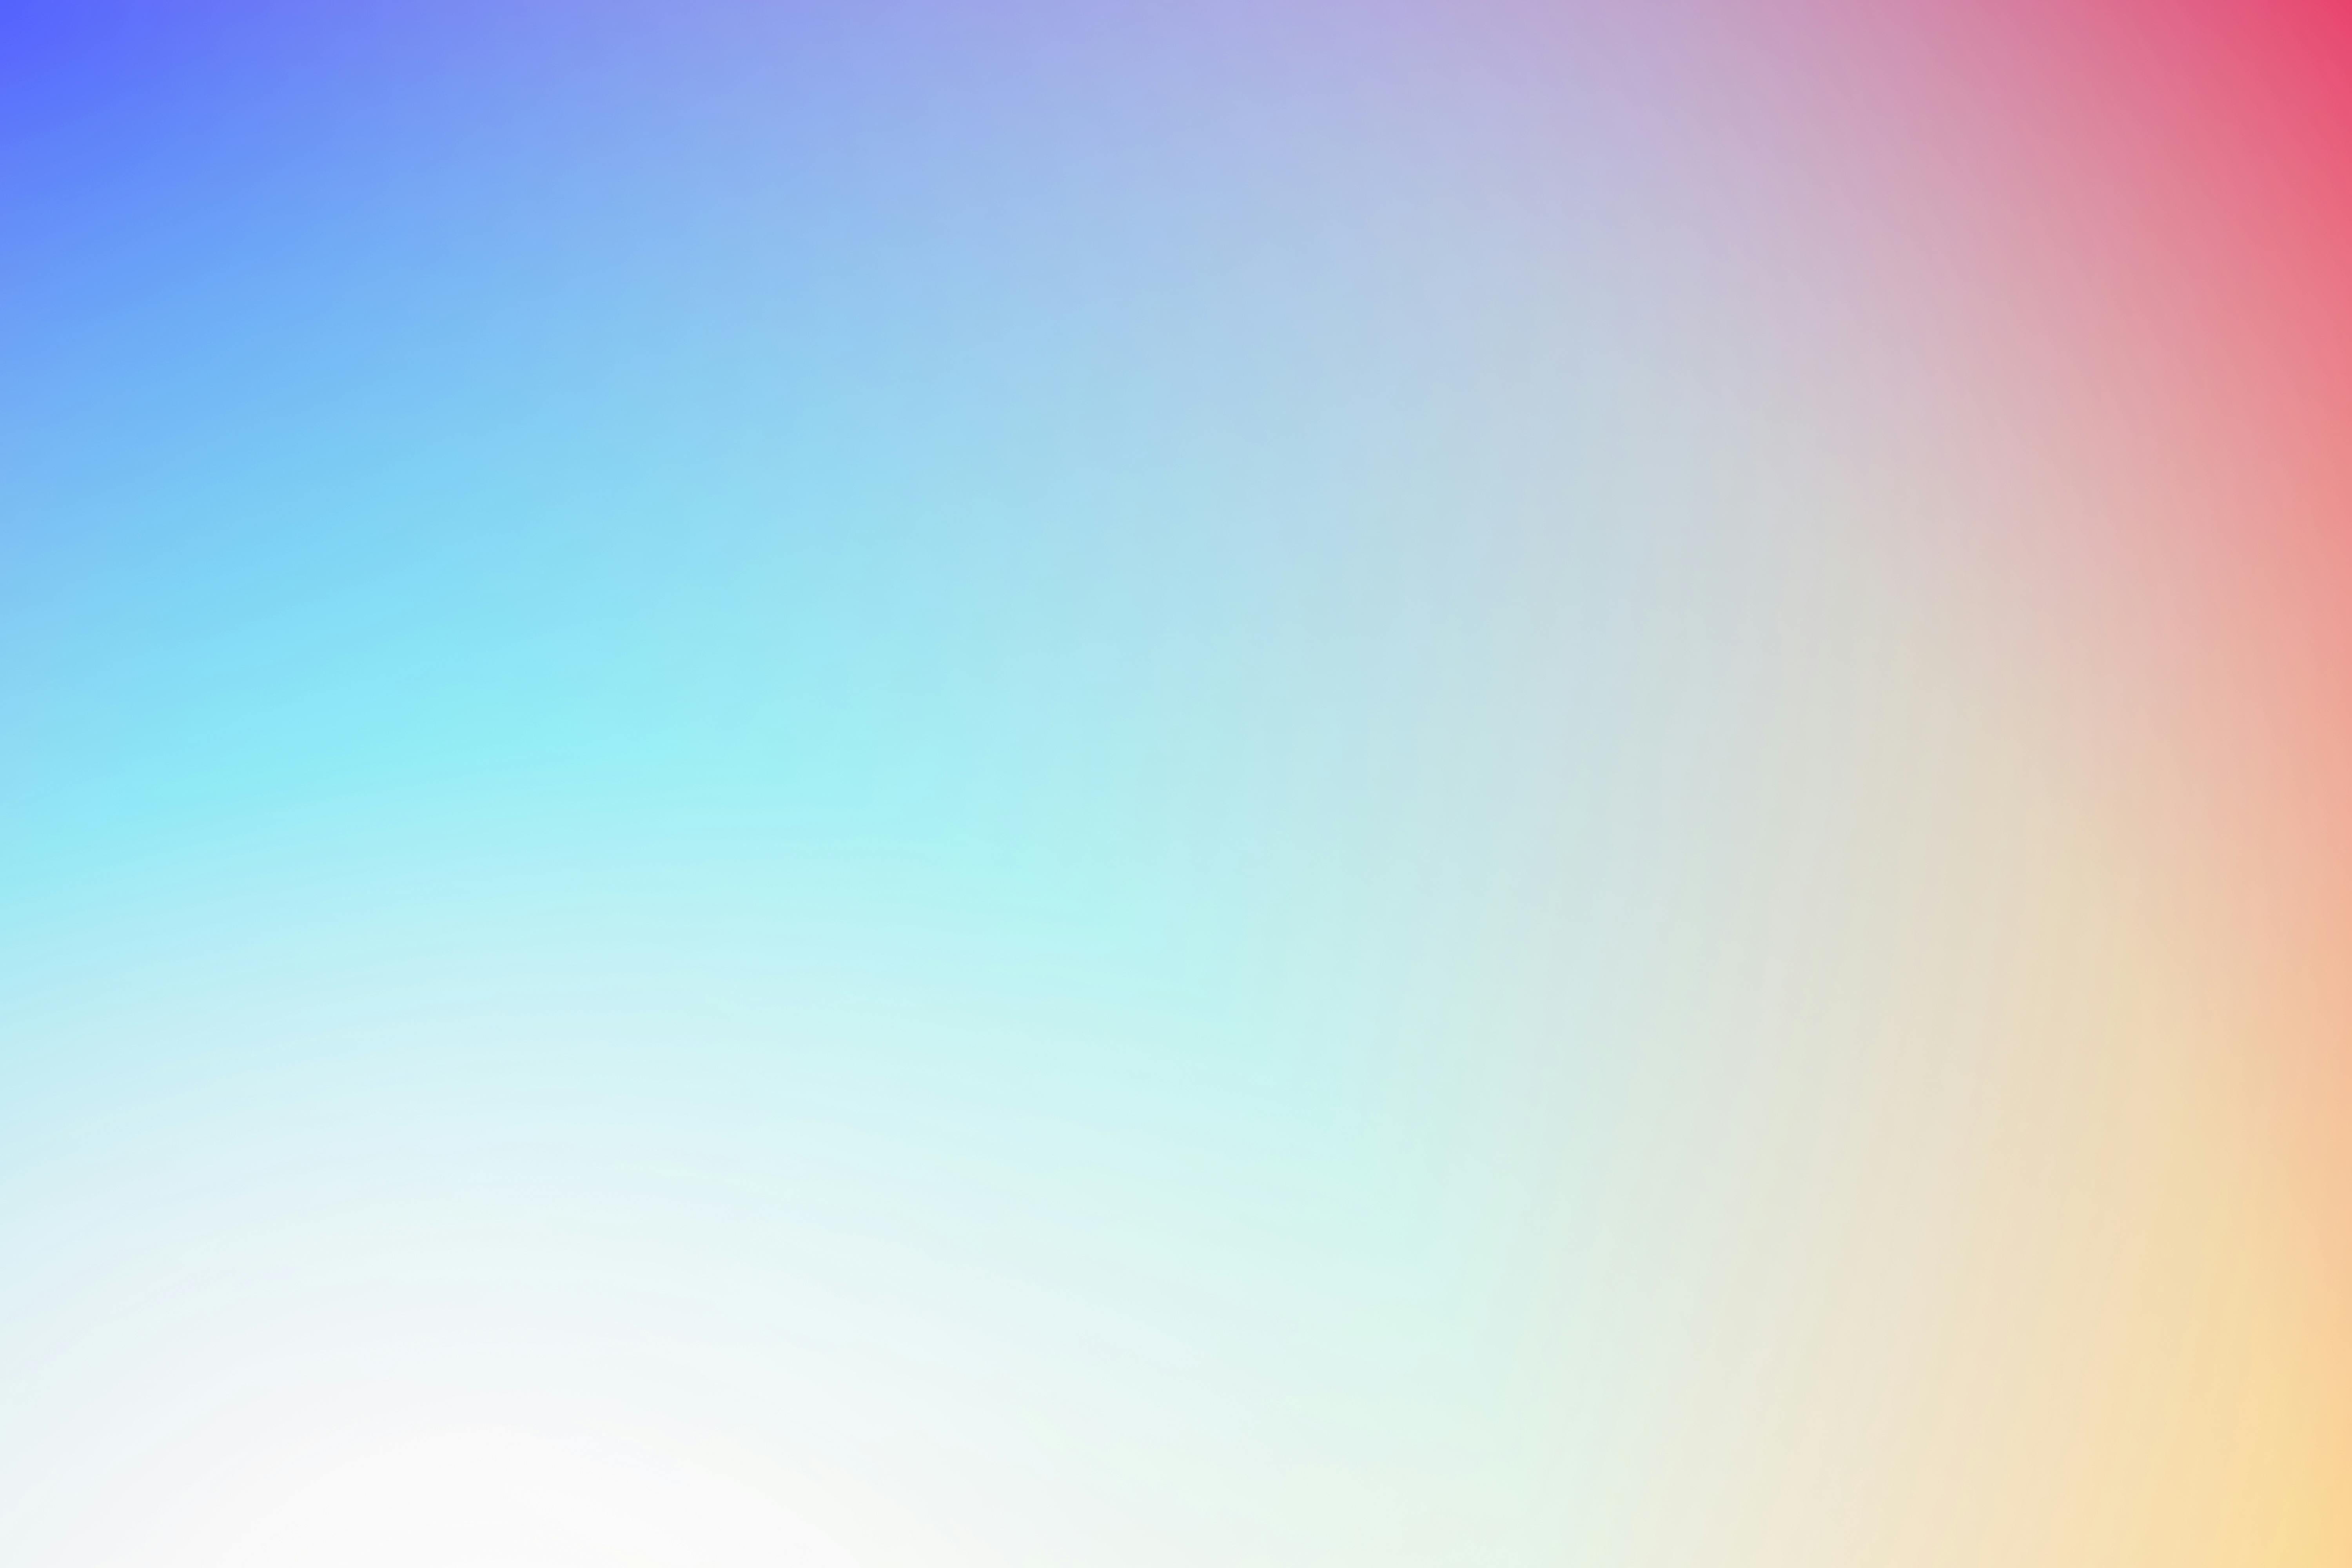 Swift Gradient in 4 lines of code  by Adriano Triana  Better Programming